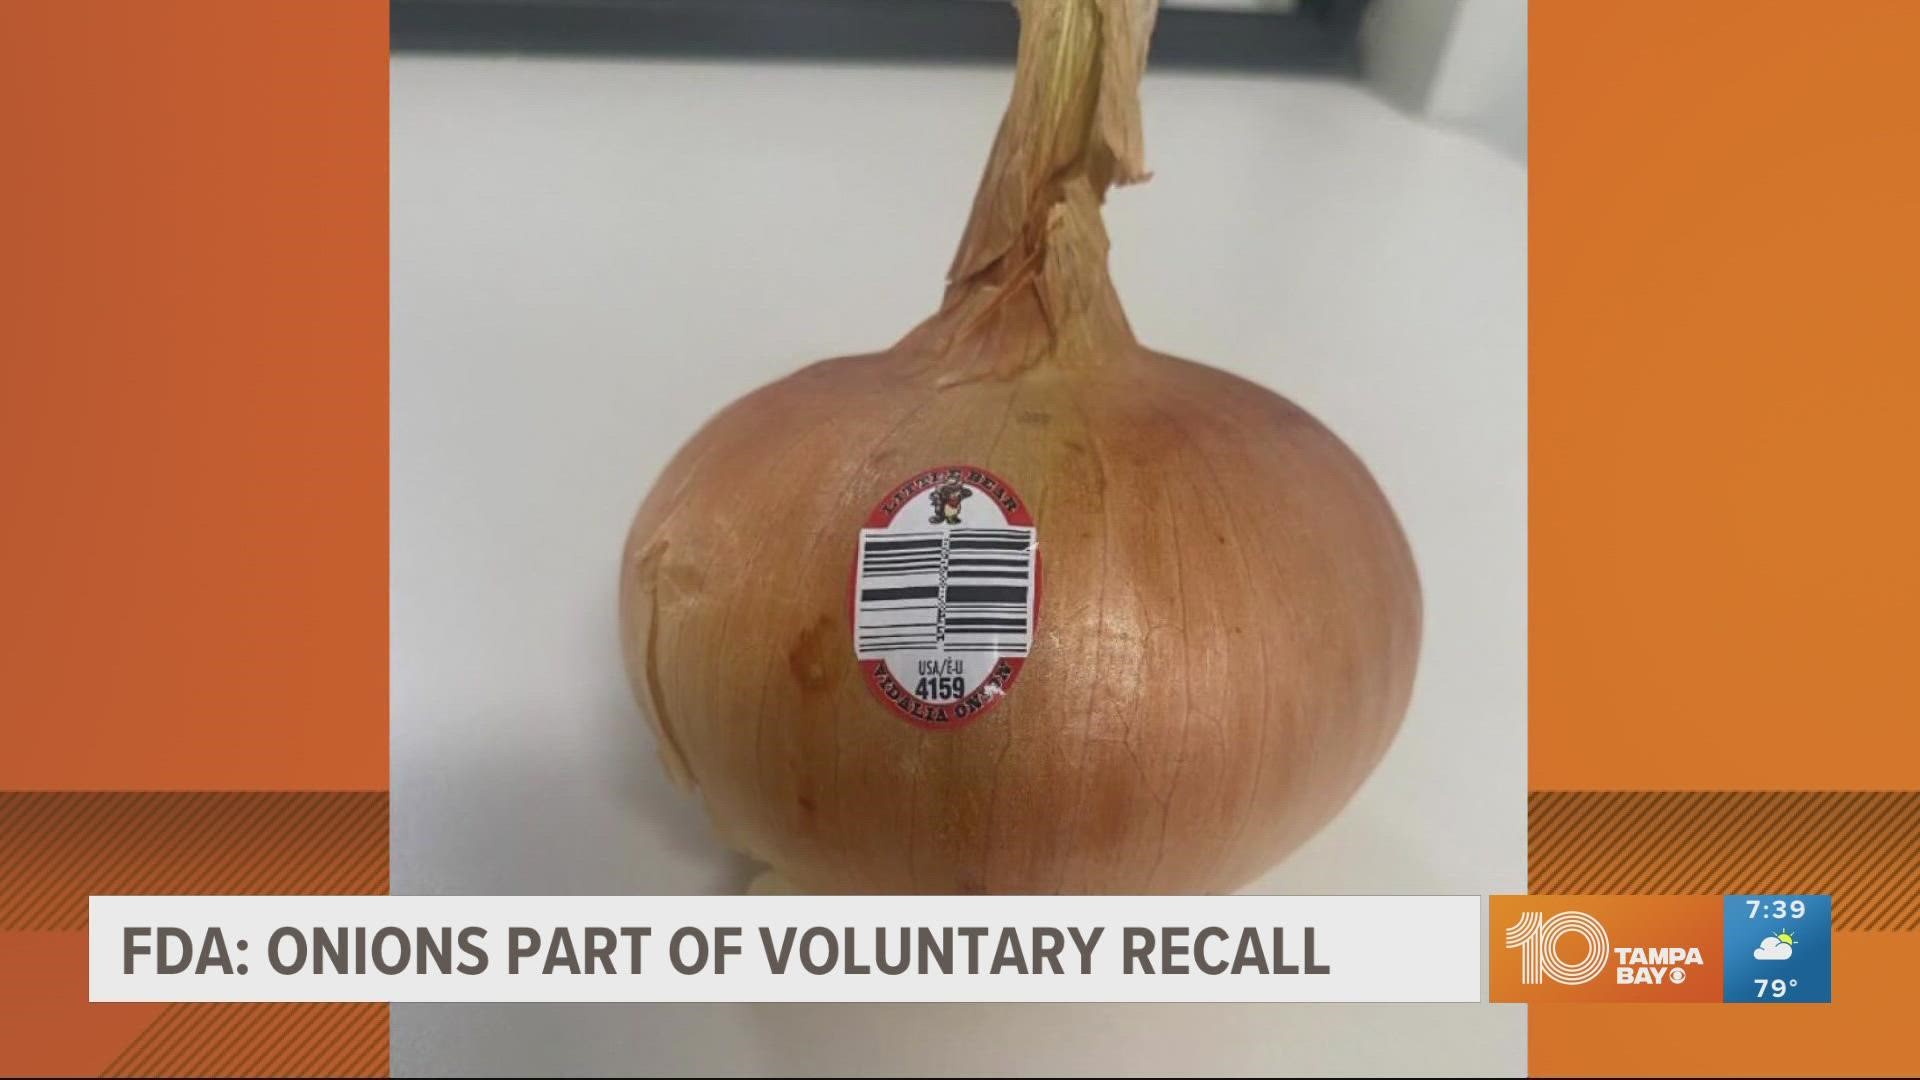 The Little Bear brand Vidalia onions were sold between June 22-24 at Publix stores and have "PLU 4159" on the sticker.